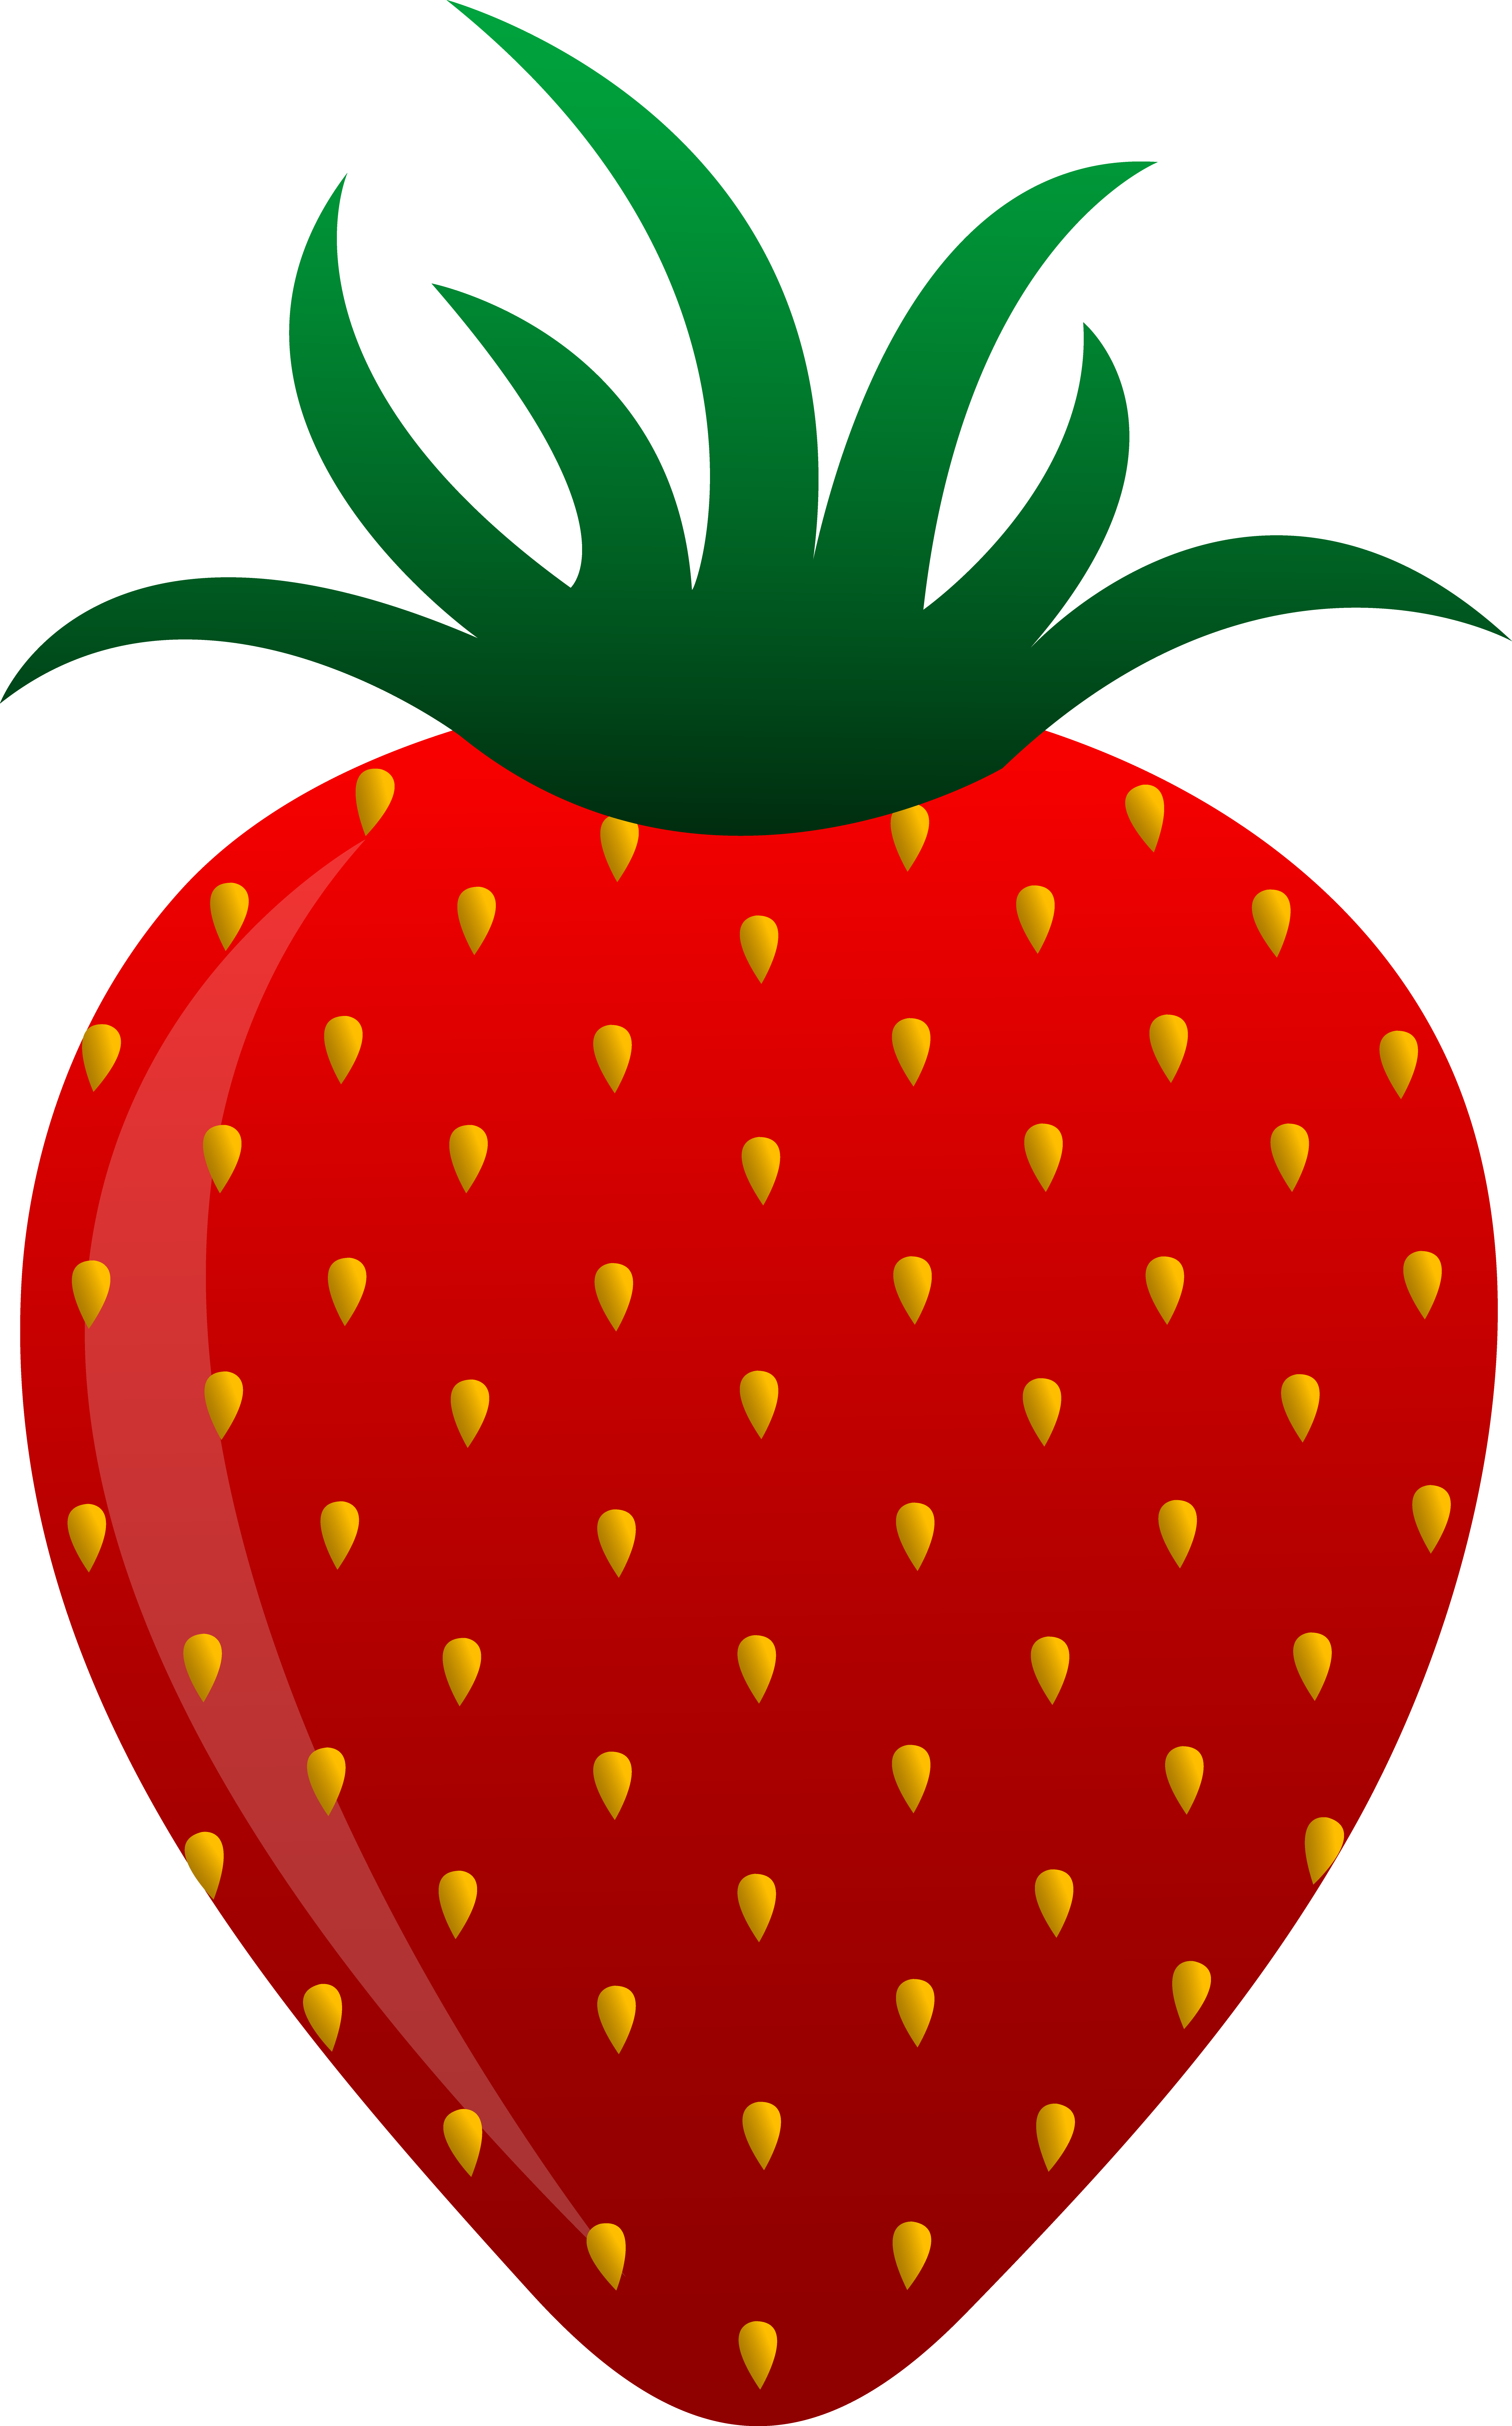 Strawberry Clip Art Free | Clipart Panda - Free Clipart Images